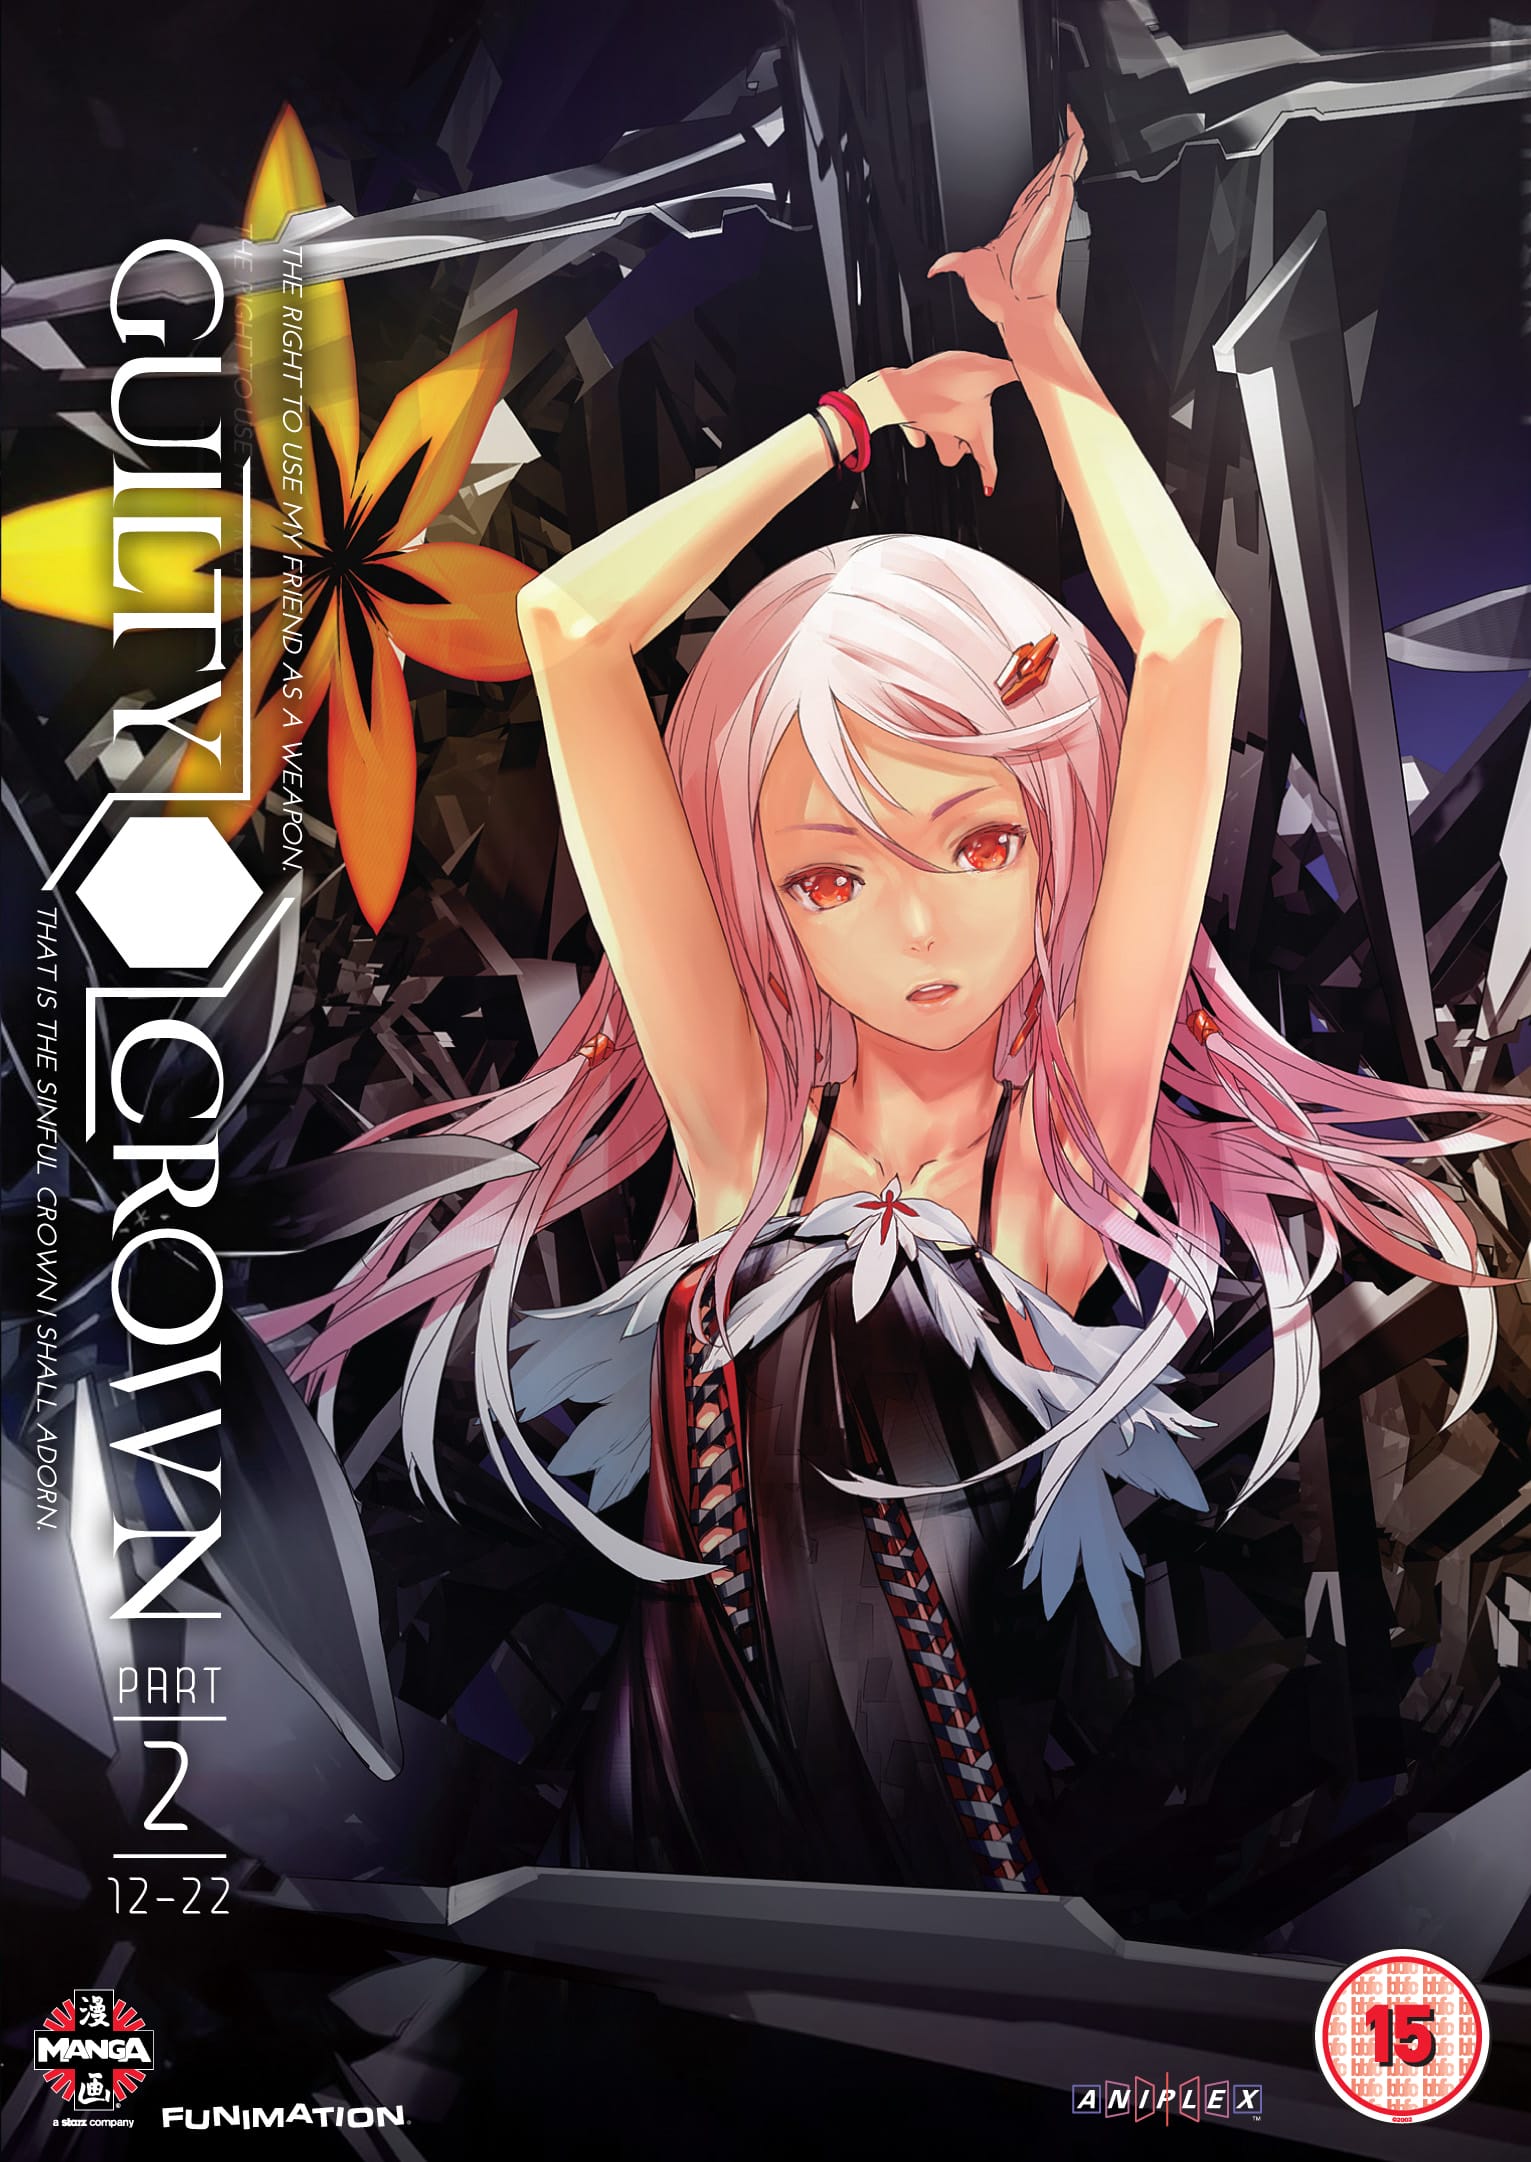 Mind over matter: A review of Guilty Crown Part 2